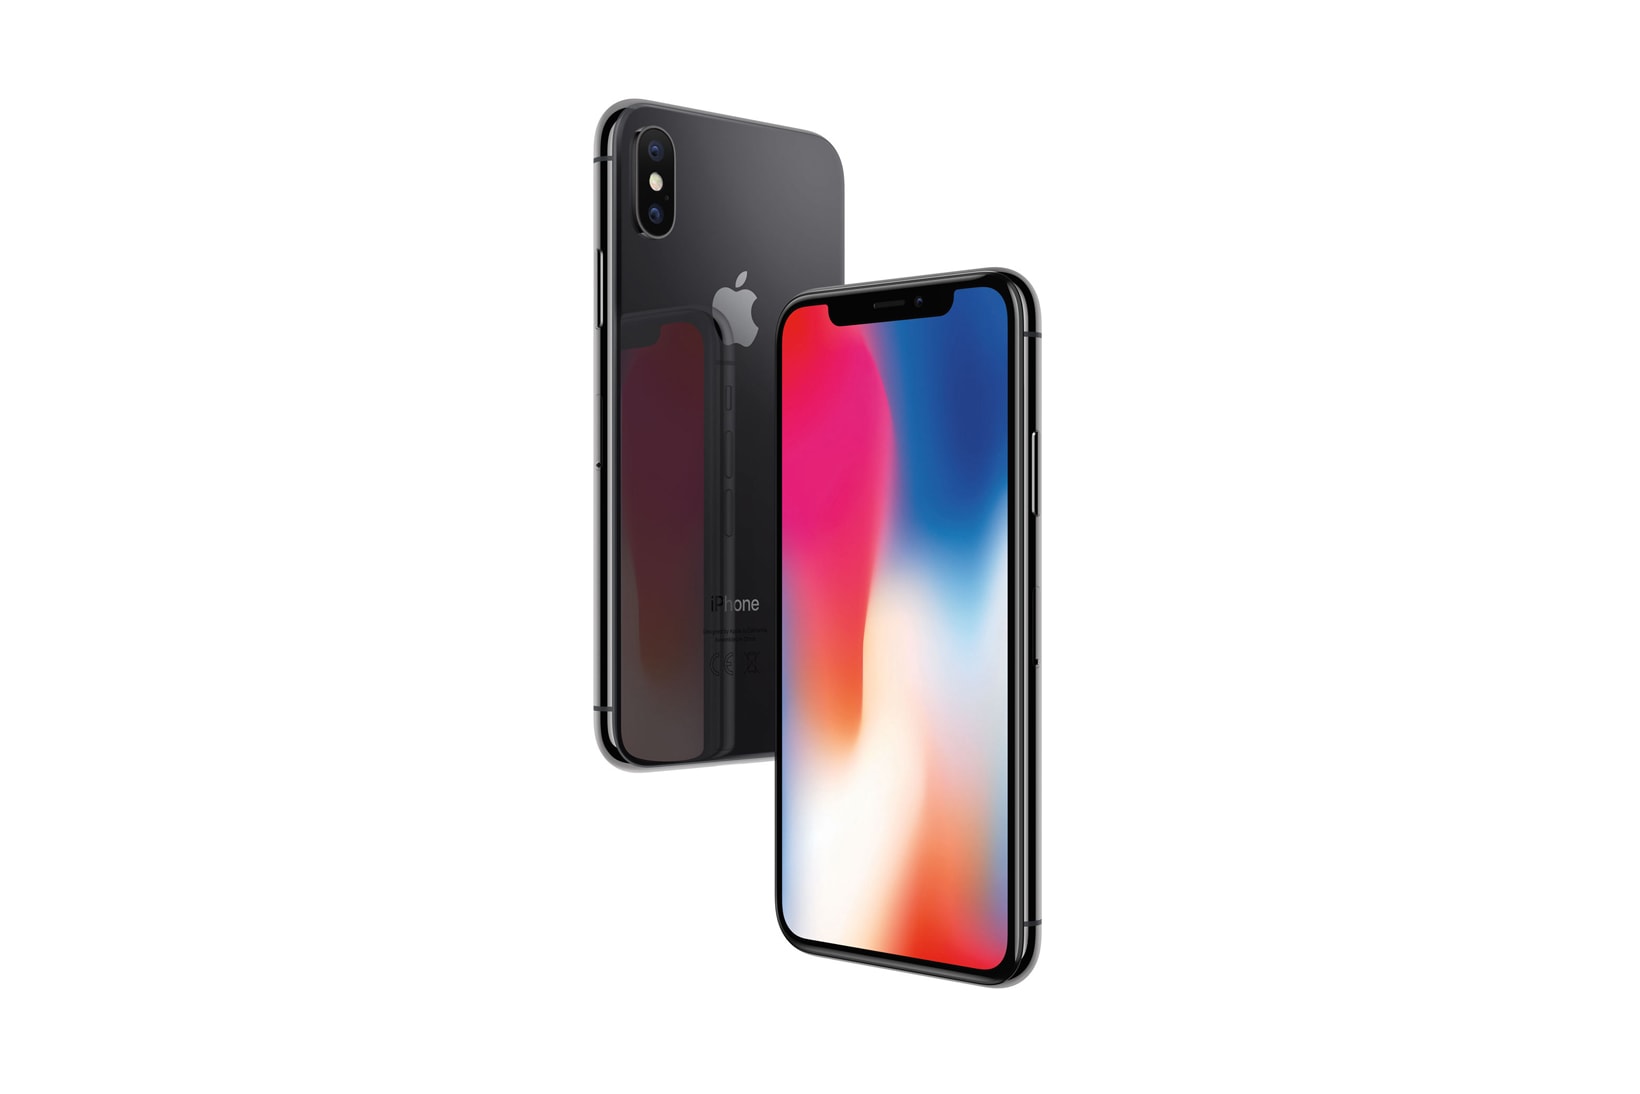 Apple iPhone X Smartphone Technology Devices Gadgets